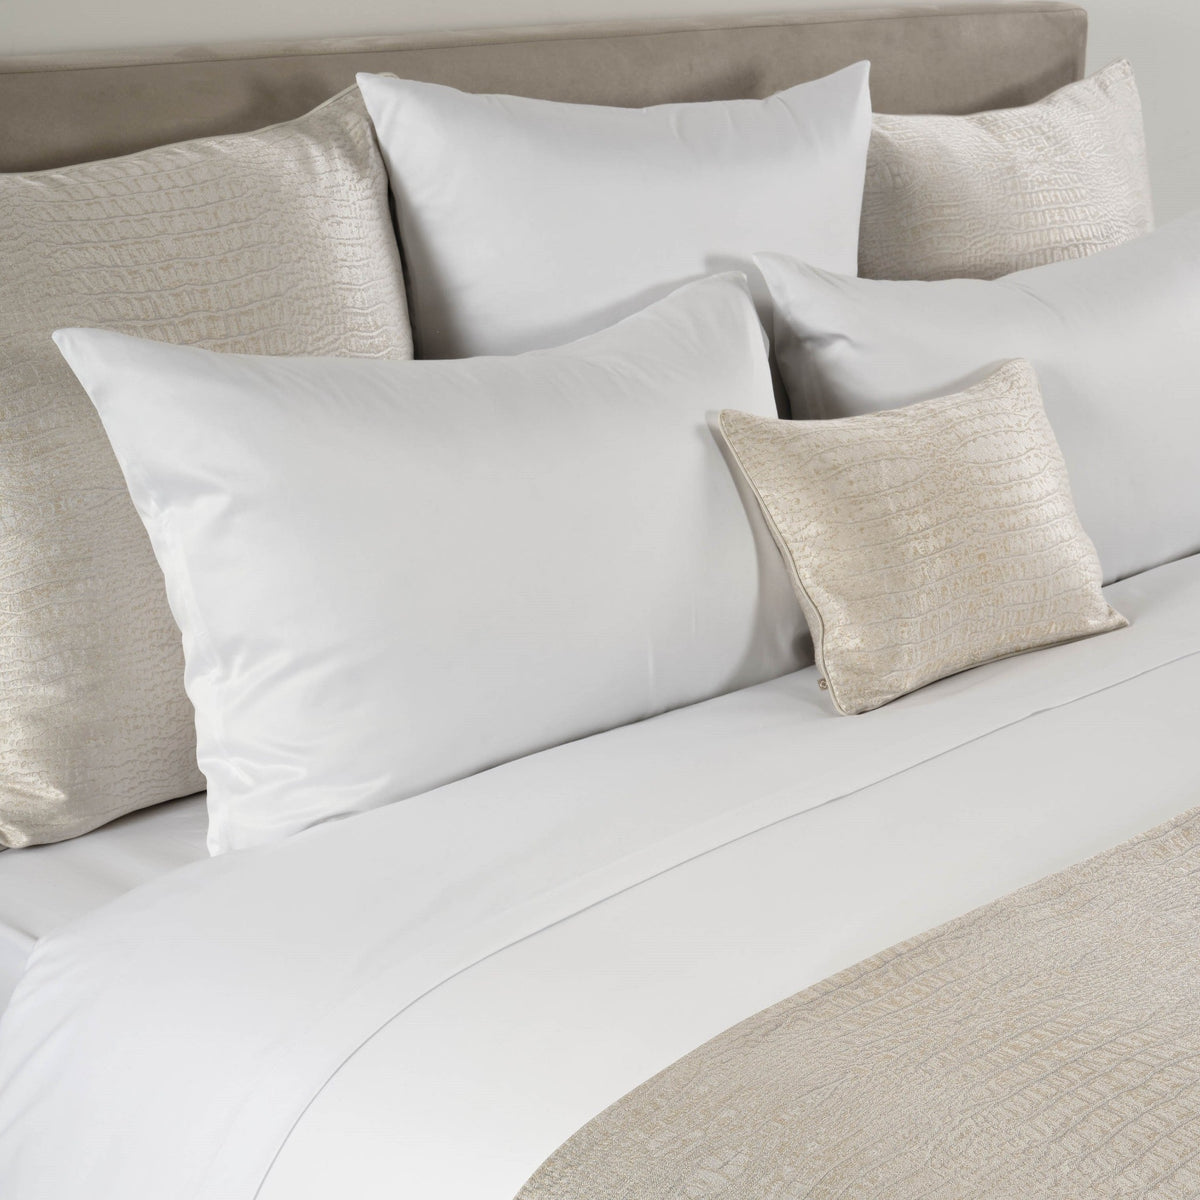 Close Up Image of Celso de Lemos Luxe Bedding in Naturel Color